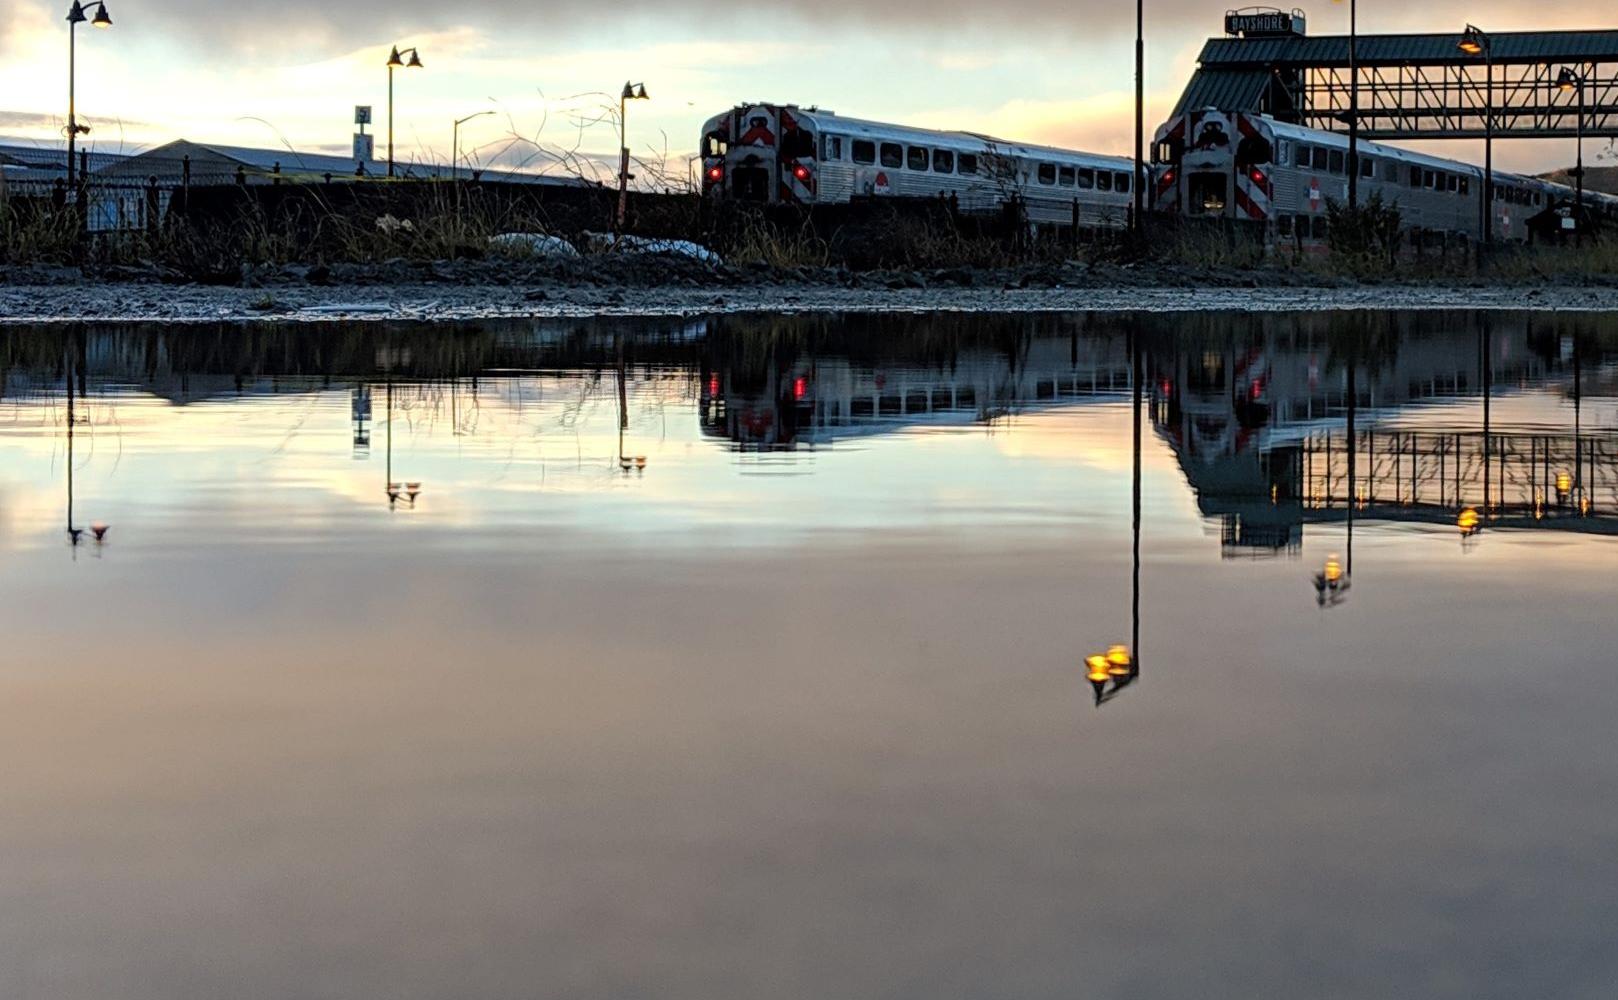 Spectacular photo of a southbound train pulling through the Bayshore station, also reflected in the water in the foreground